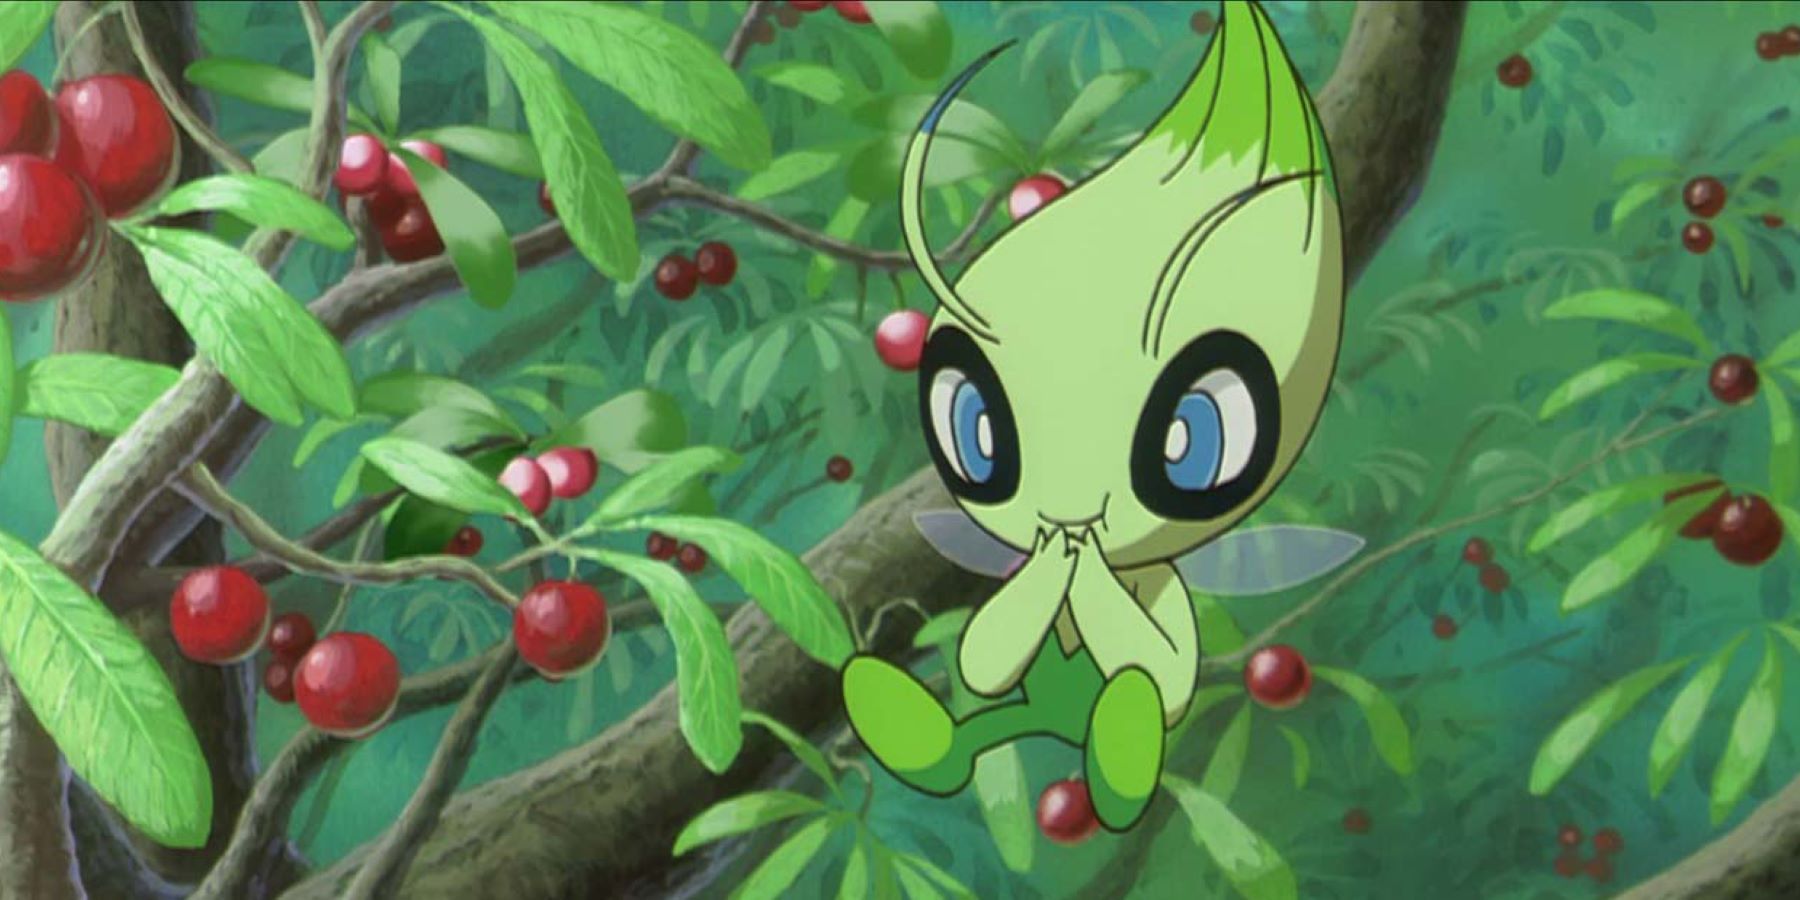 A Celebi floating and eating berries off of a tree in the Pokemon anime